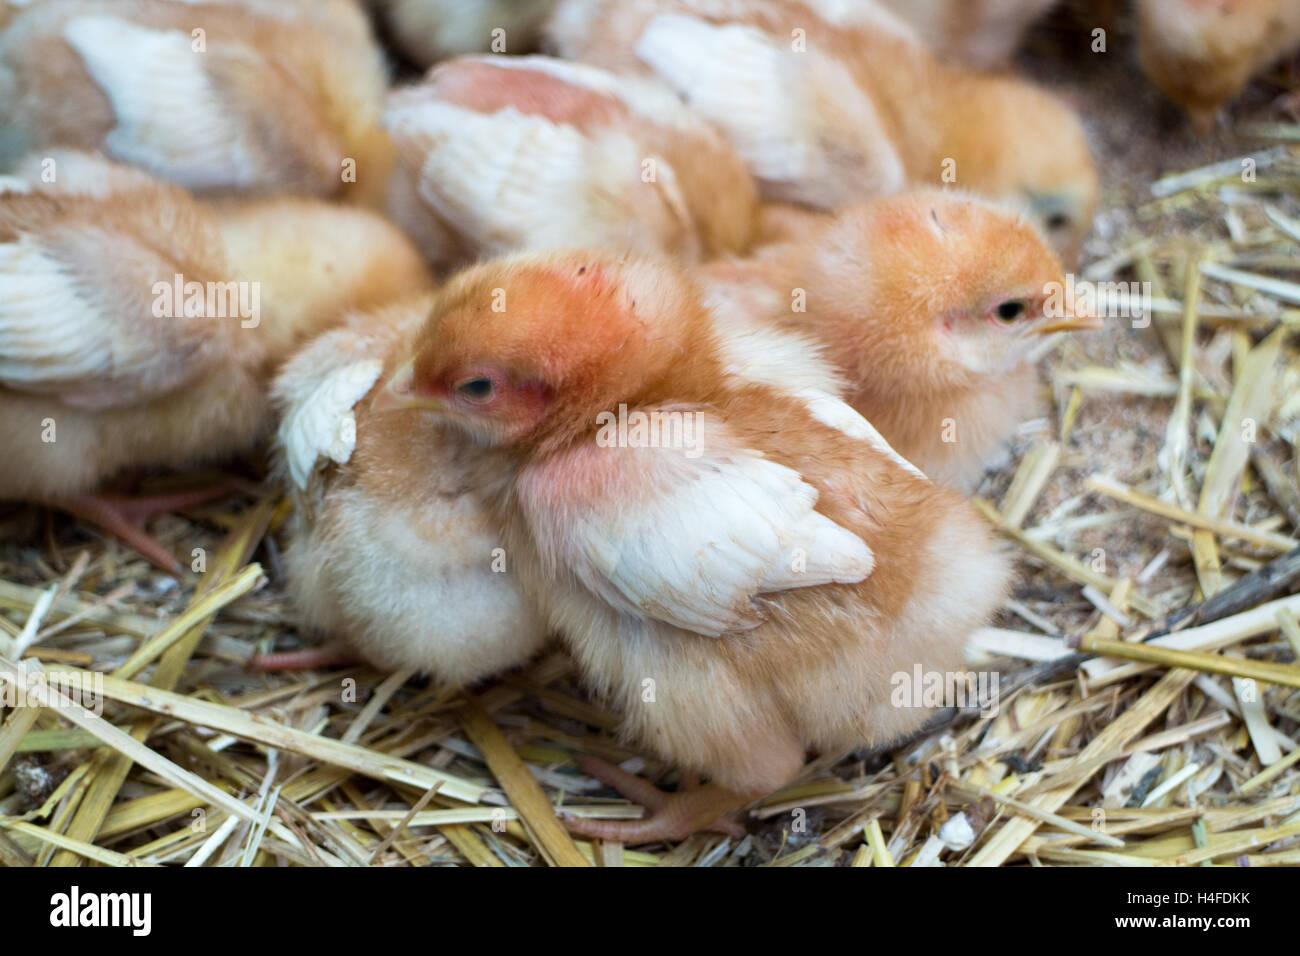 Baby chickens, chicks growing up fast, little fluff balls, farm inspired Stock Photo